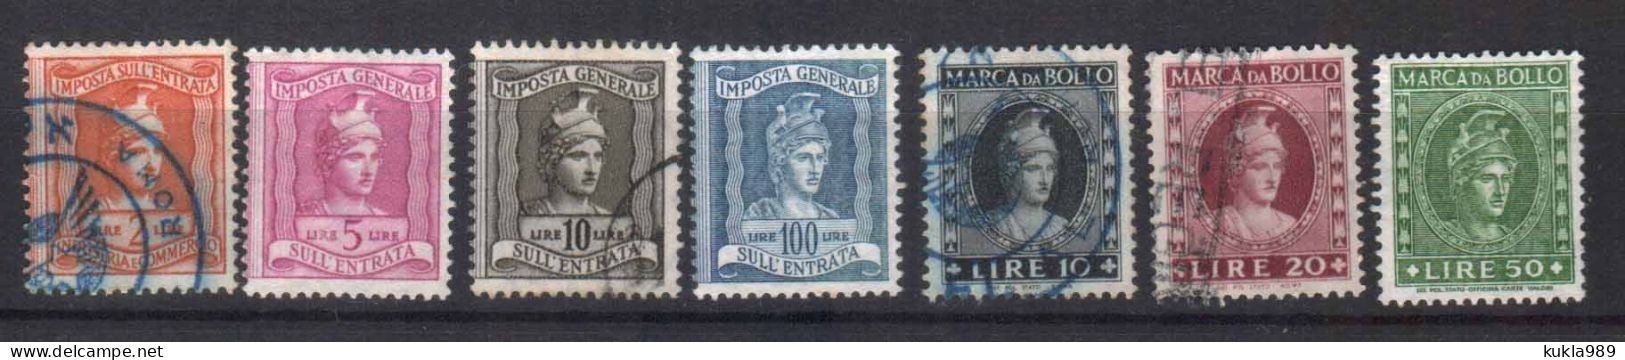 ITALY , C.1950s FISCAL REVENUE TAX 7 STAMPS - Fiscales